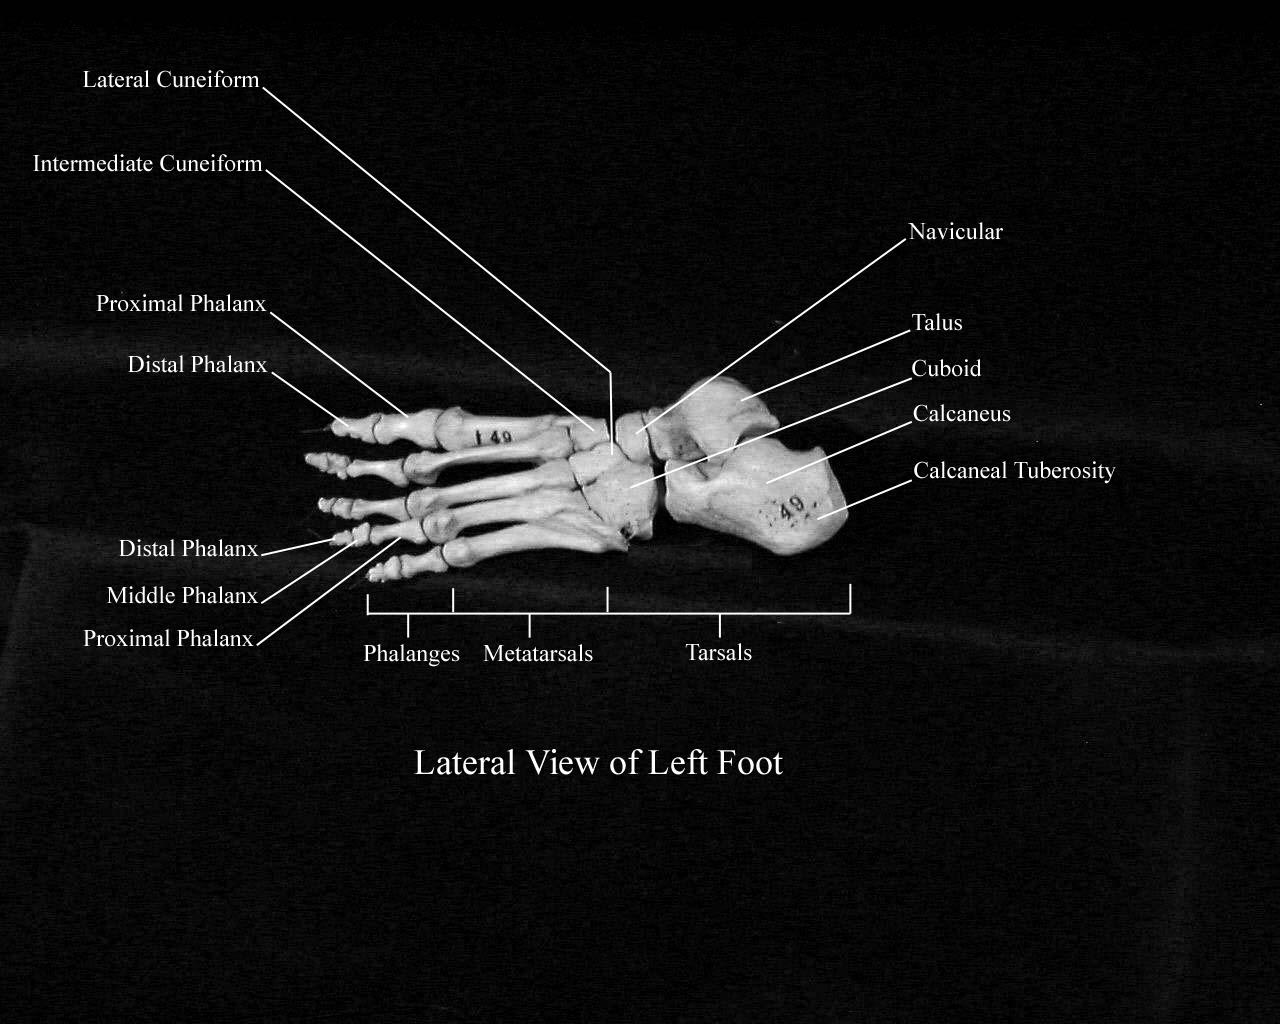 a labeled picture of the bones of the foot from a lateral view